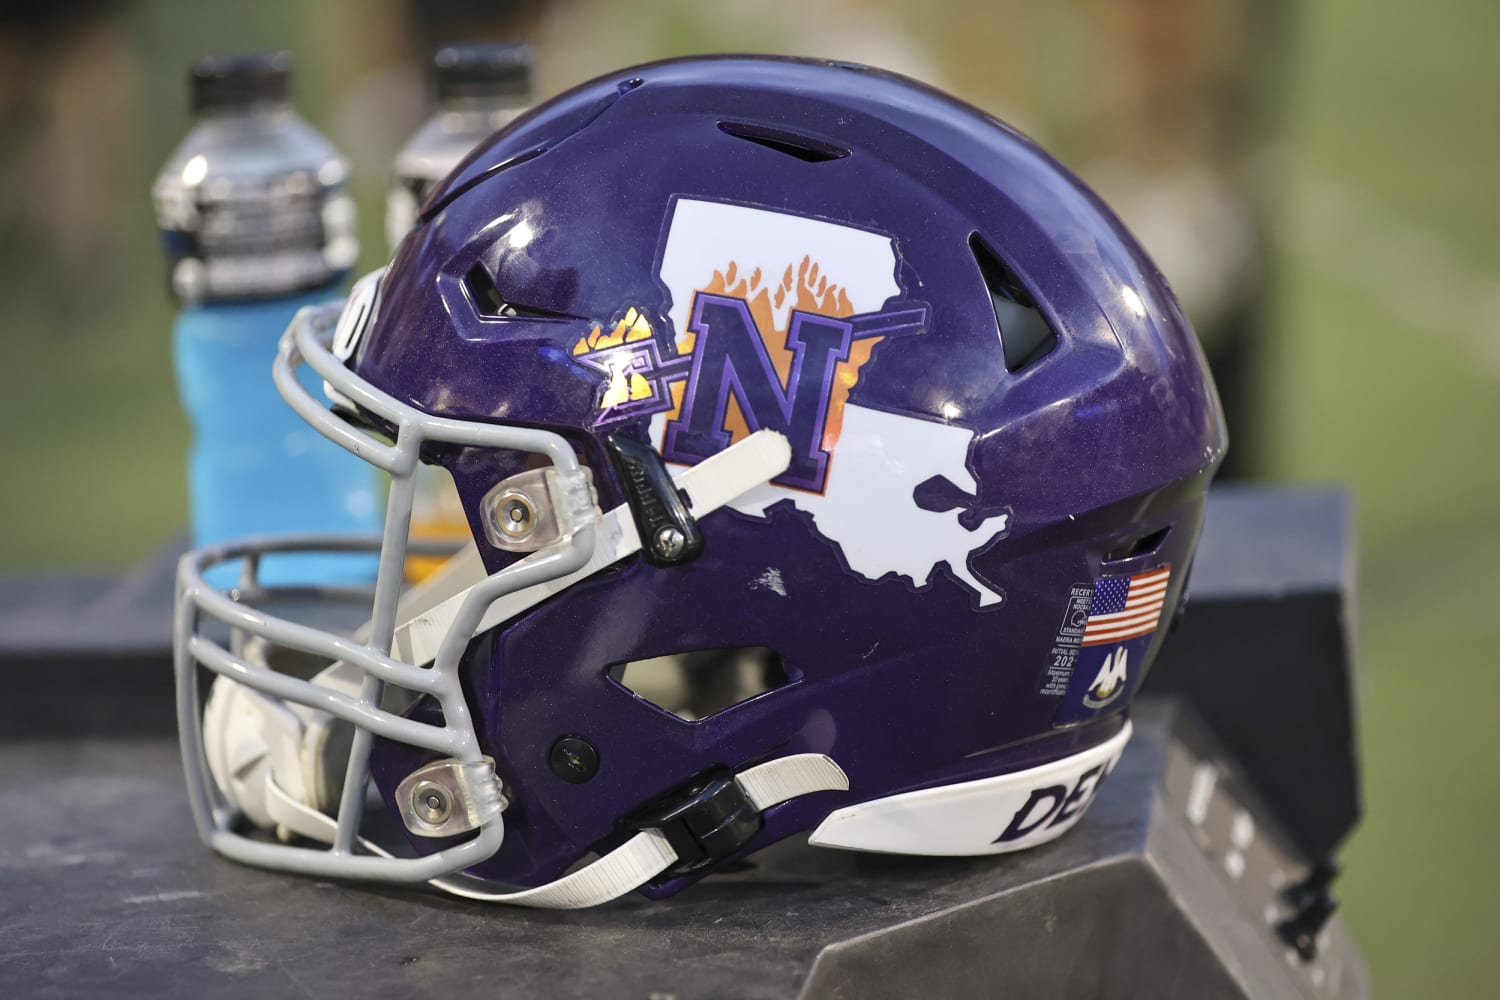 Northwestern State cancels football season after teammate’s death